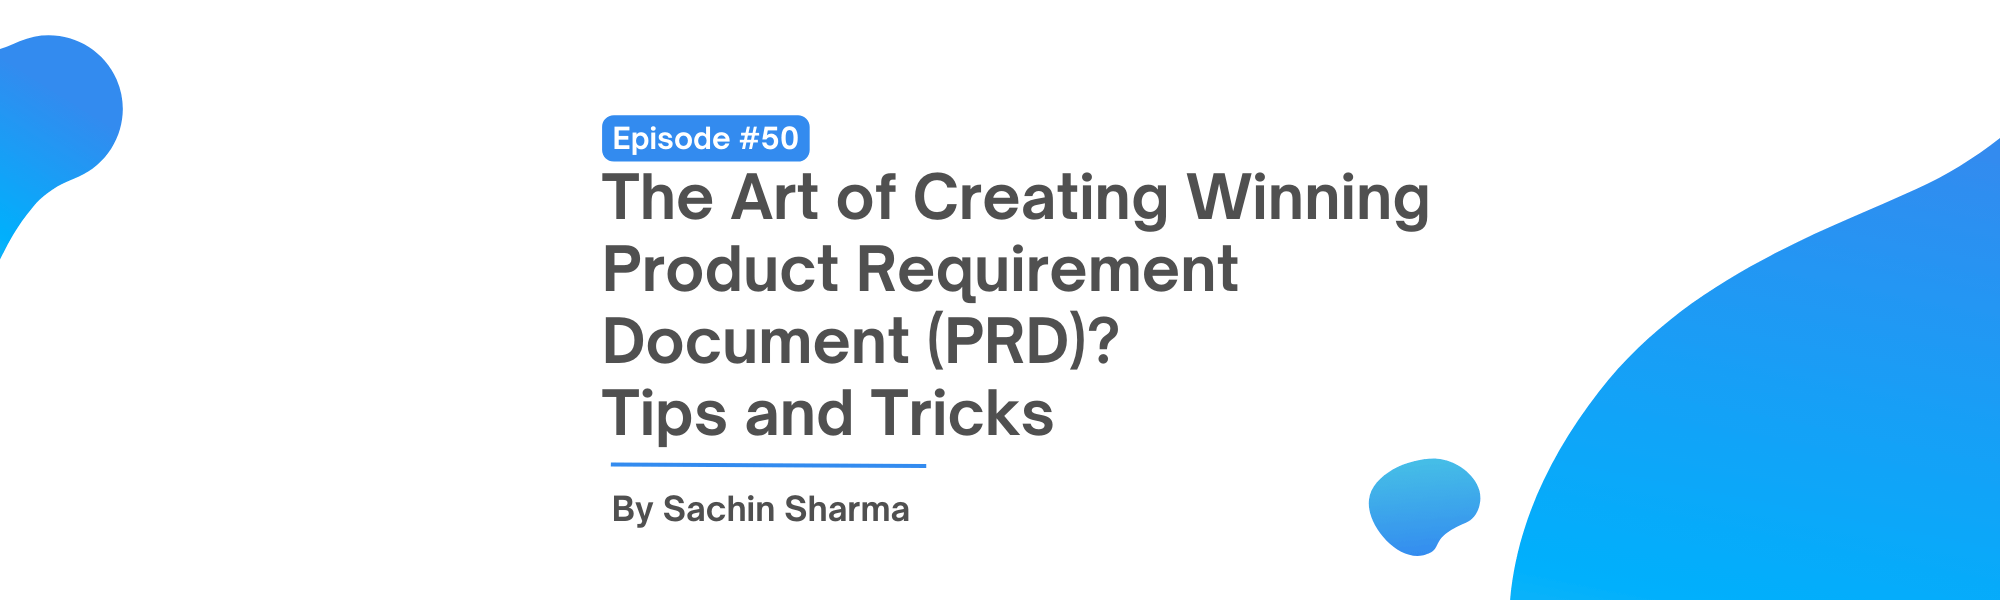 The Art of Creating Winning Product Requirement Document (PRD)? Tips and Tricks